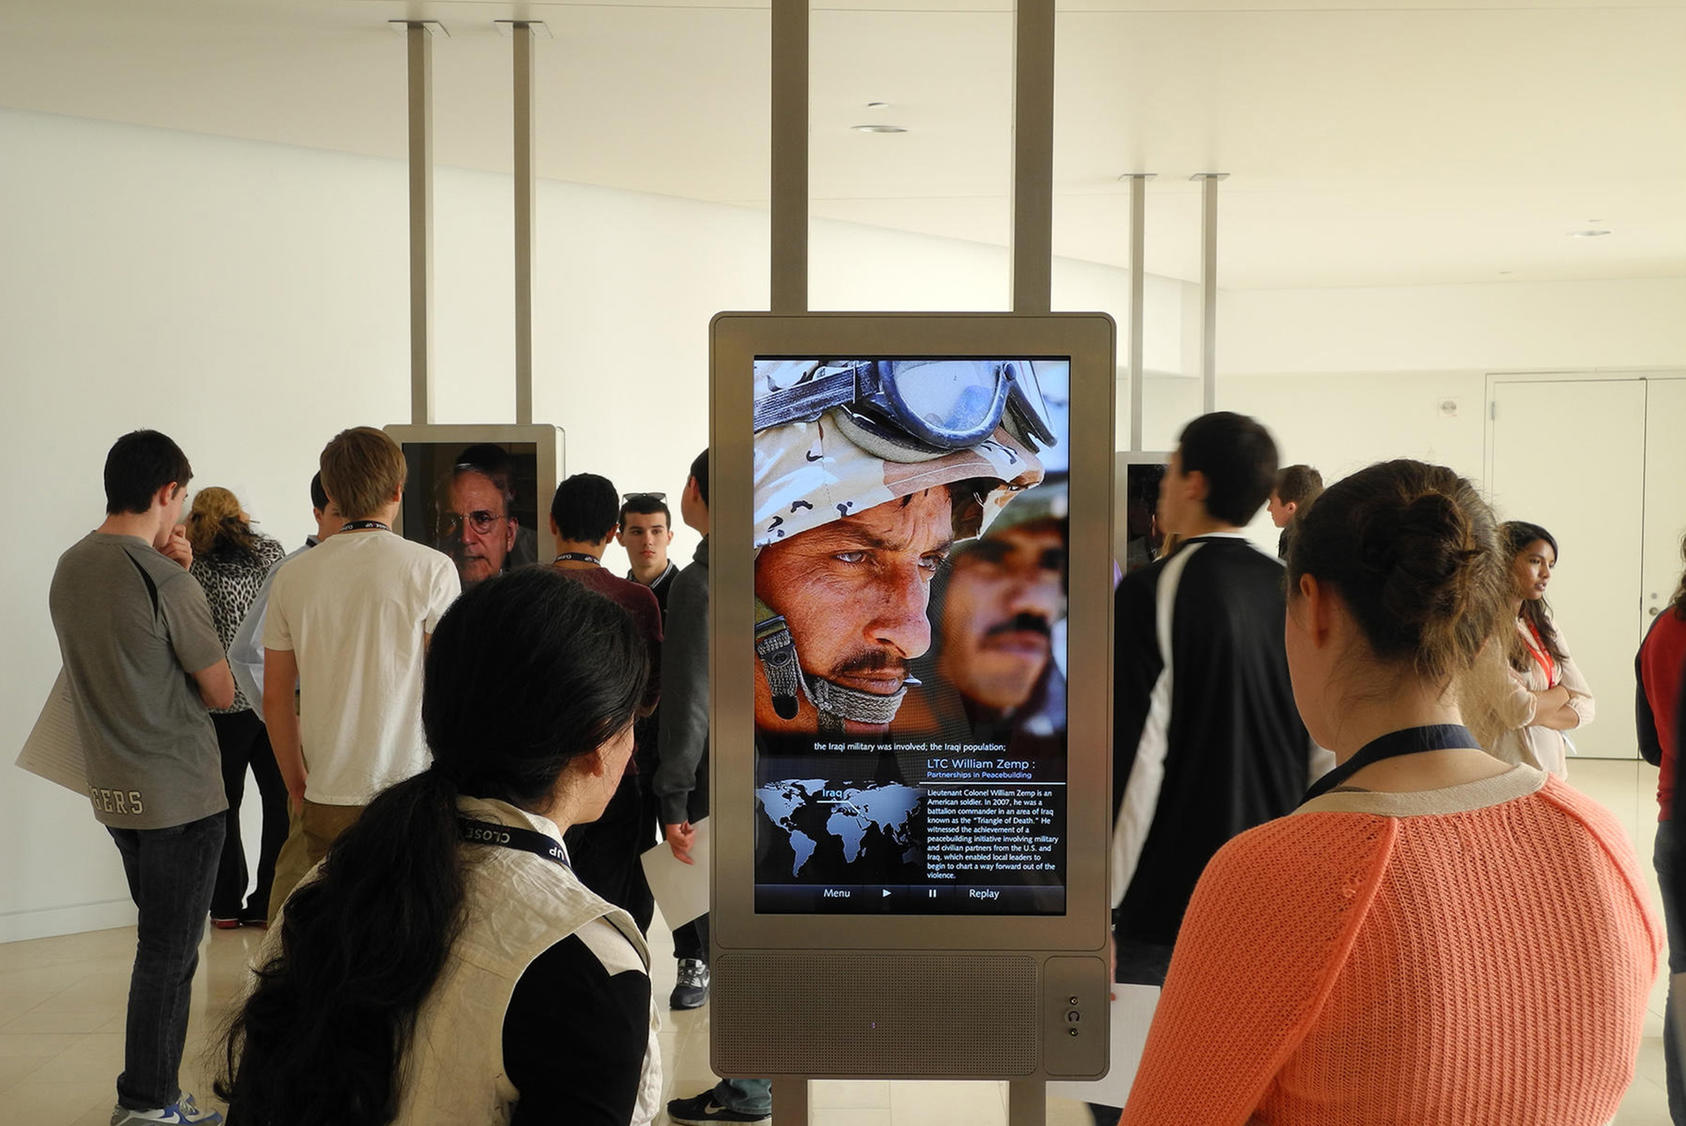 Students at USIP headquarters view the Witnesses to Peacebuilding exhibit, which uses multimedia and video to tell the powerful individual stories of peacebuilders of various types from around the world.